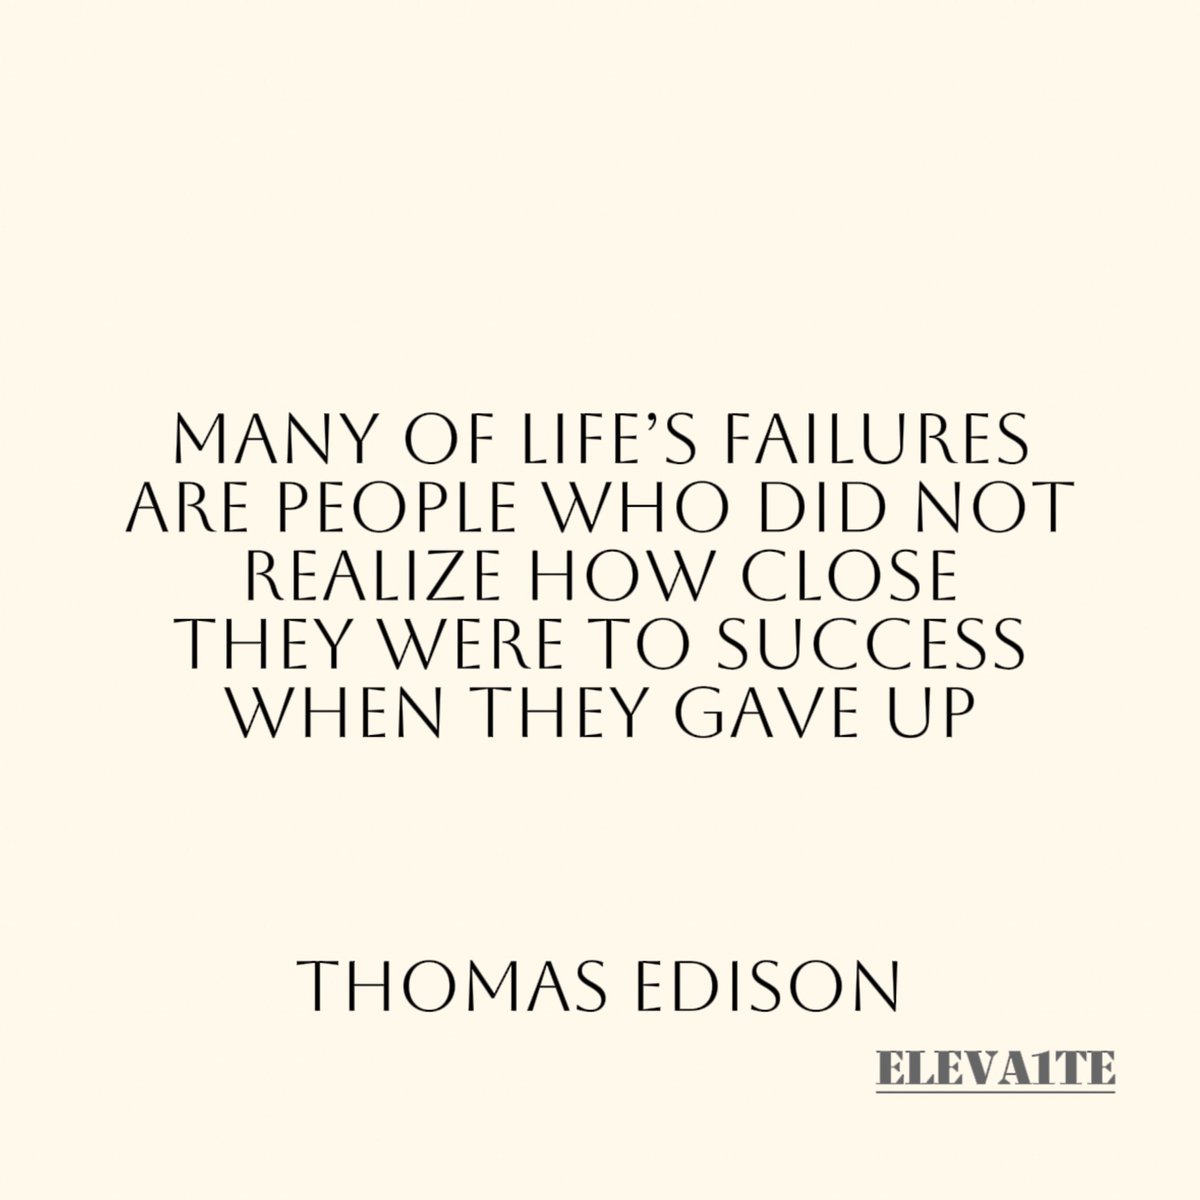 Perseverance Unlocks The Door To Success Even When It Seems Far Away Keep Going! #eleva1te #eleva1te100 #r1zefocusconquer #motivationalquotes #motivationquotes #motivateyourself #chosenone #consistencyiskey #hardworkpaysoff #RiseTogether #dreamchaser #LearnAndGrind #grind